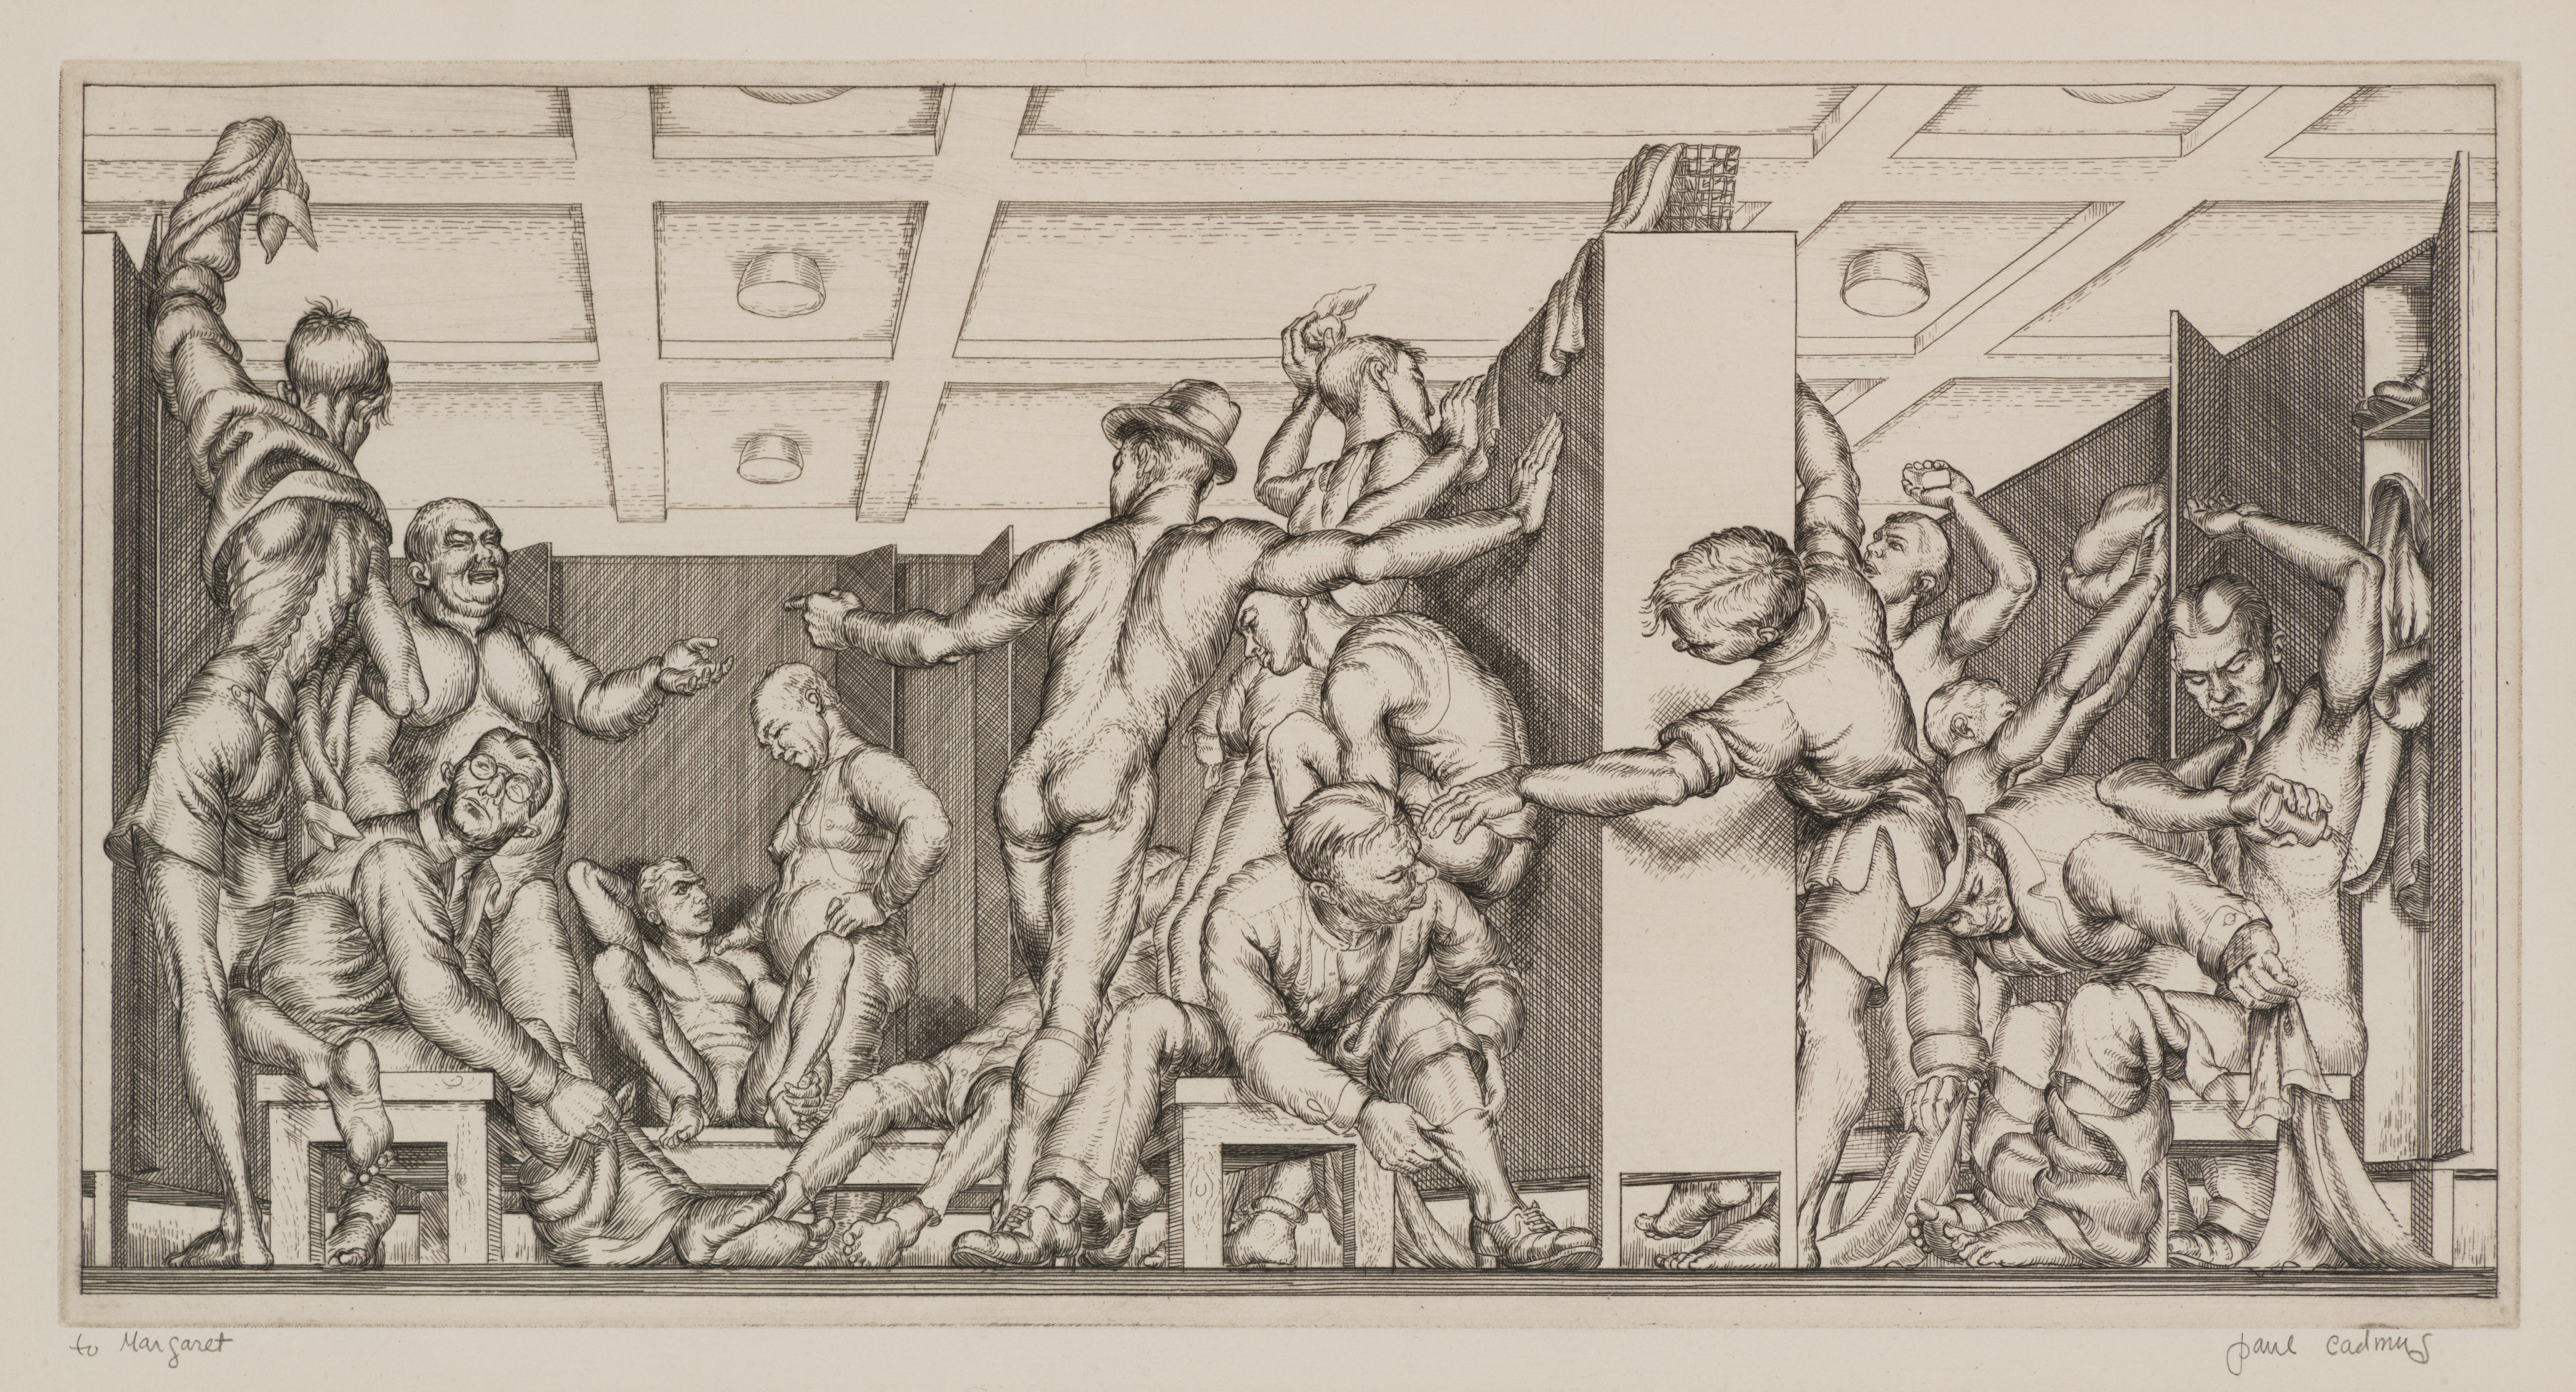 YMCA Locker Room, 1934 (printed 1979), Etching, 8 3/8 x 14 1/2 inches